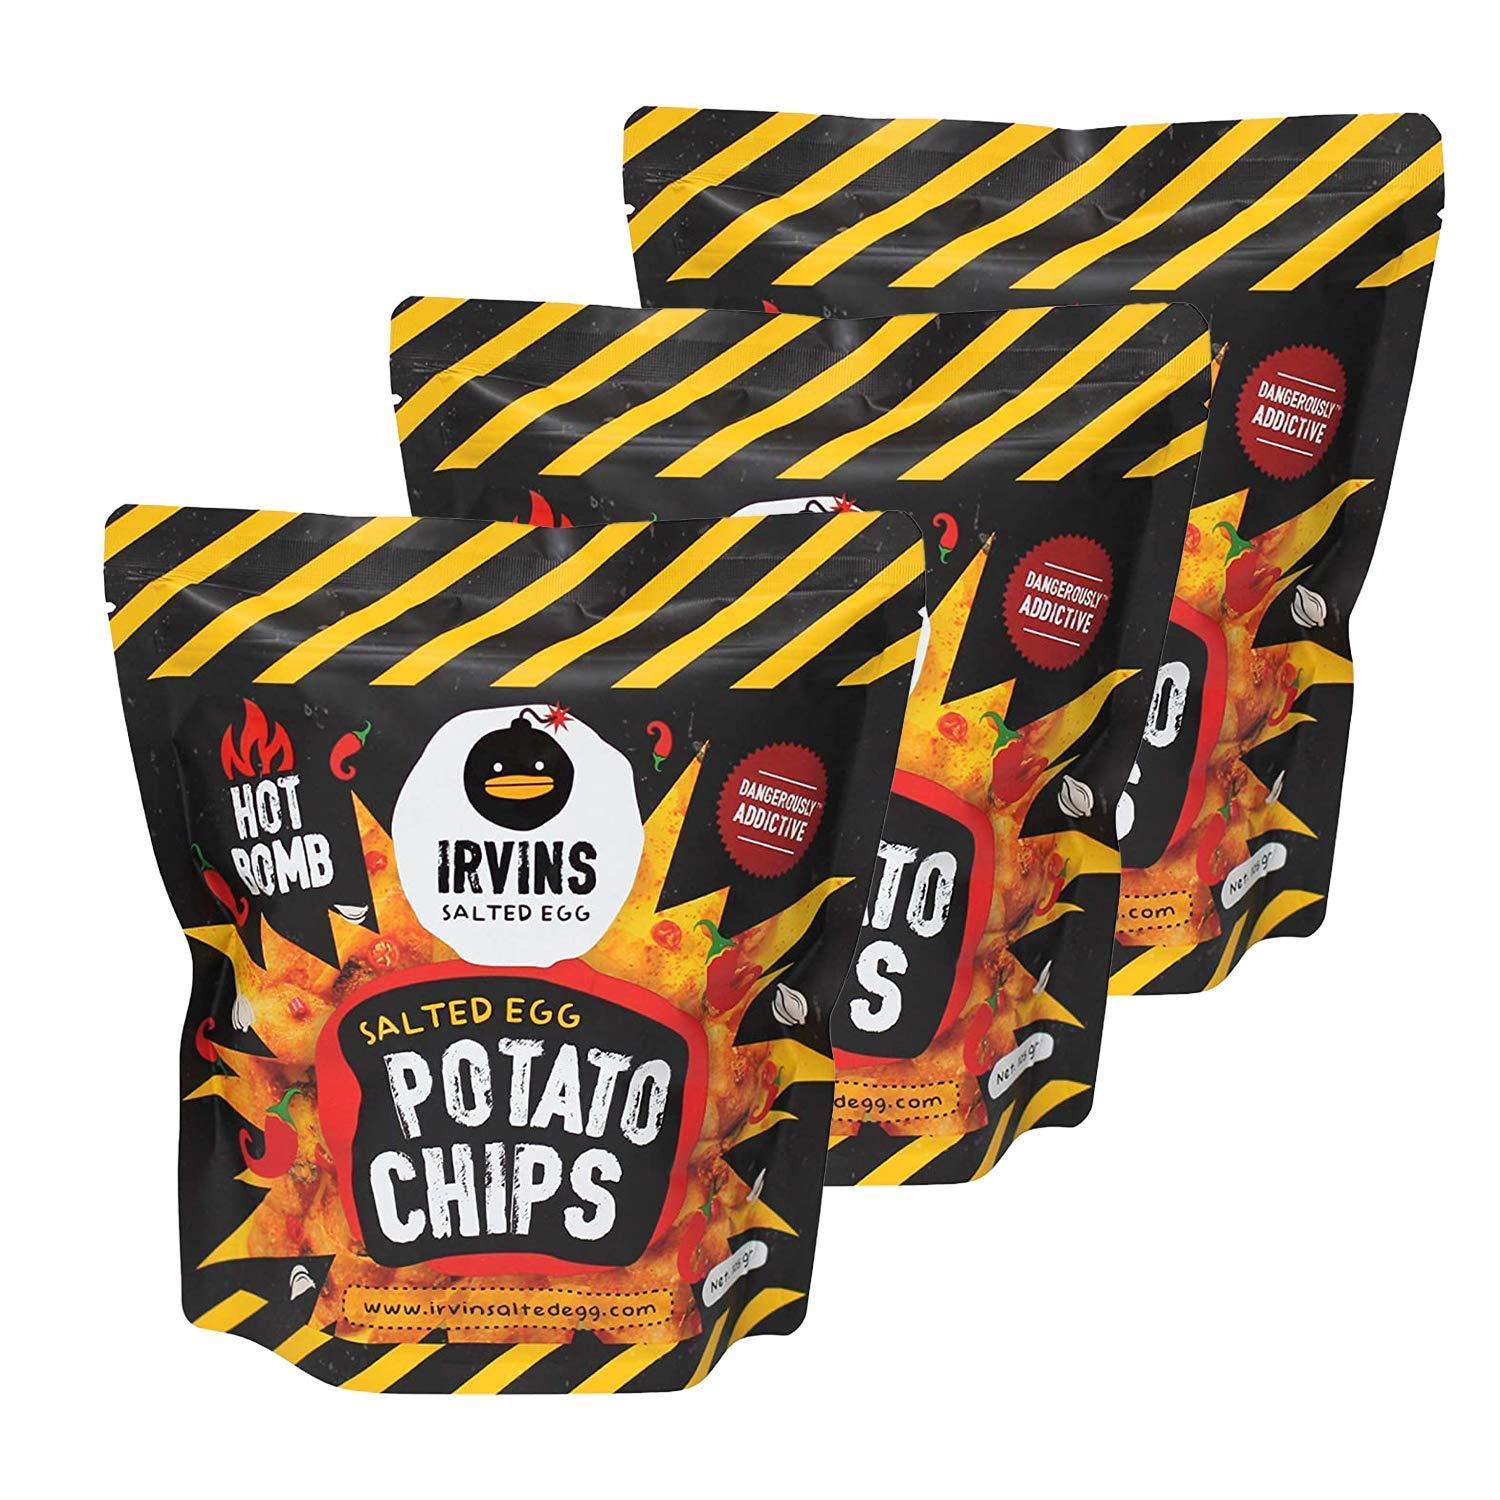 IRVINS Hot Boom Spicy Salted Egg Potato Chips 105g (Pack of 3)